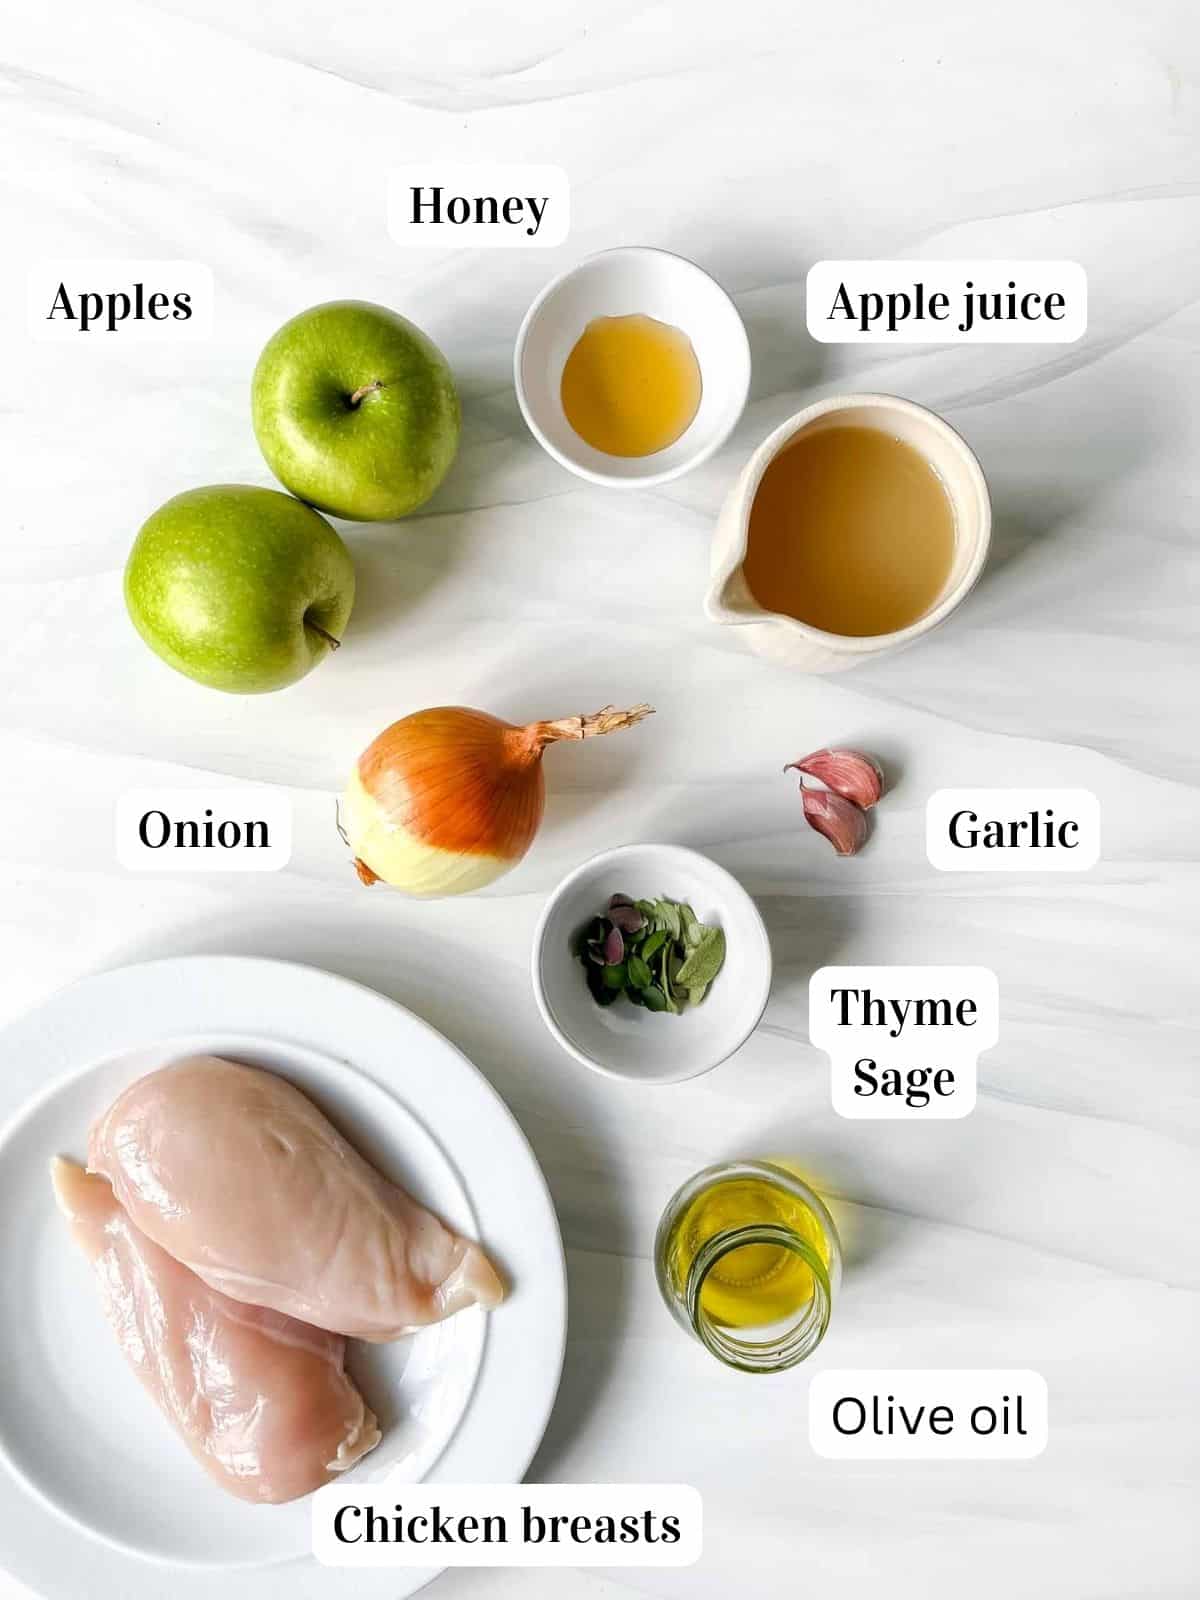 individually labelled ingredients to make Baked chicken with apples and honey including chicken breasts and herbs.